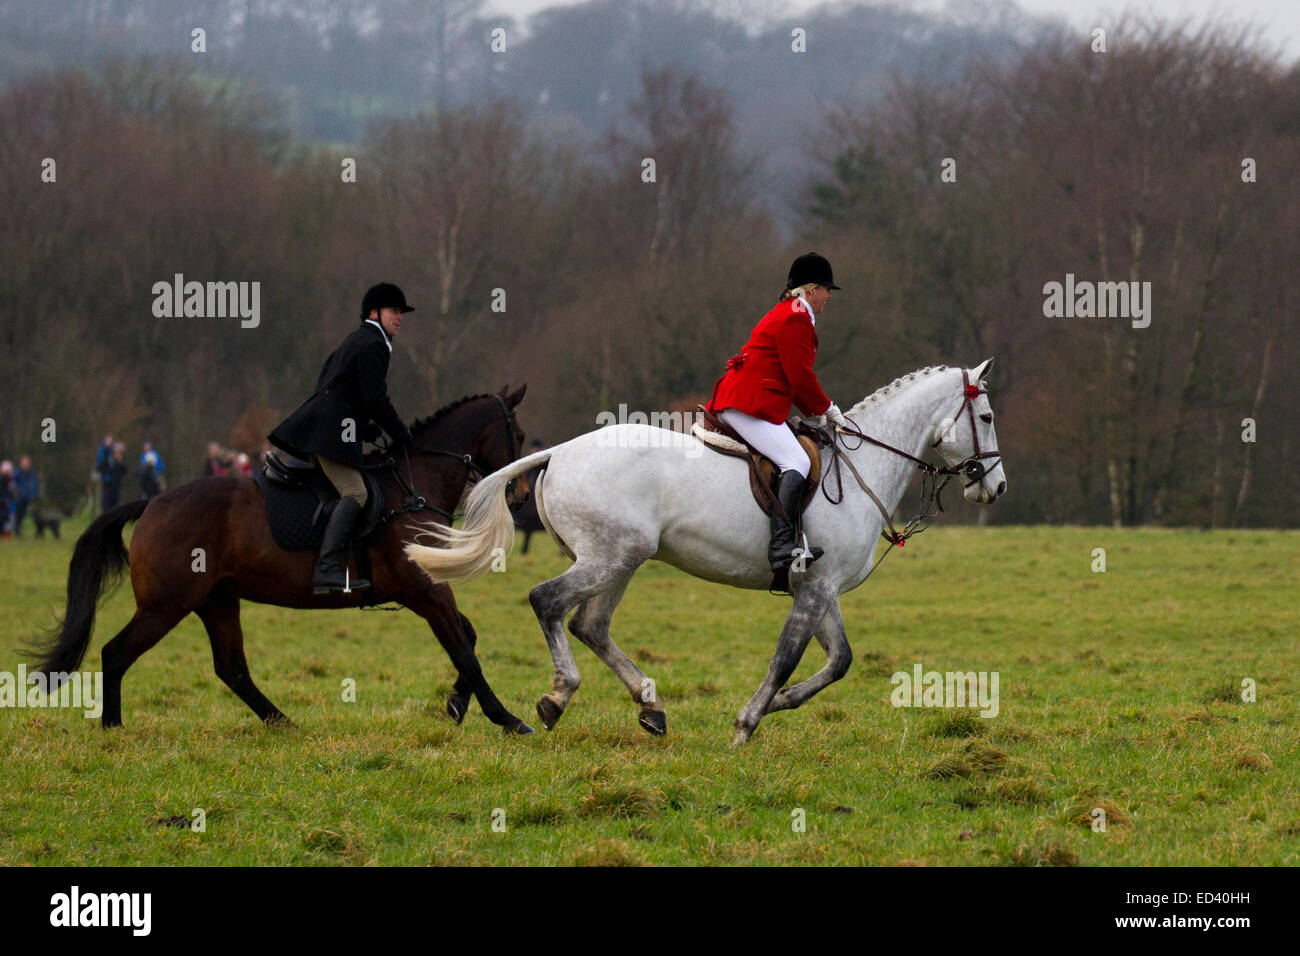 Rivington, Horwich near Bolton, Lancashire. UK.  26th December, 2014: Susan Simmons from Preston who is the Senior Lady Master of the Holcombe  Hunt, on her horse Taffy, at Rivington where Horses and riders gather for the annual traditional Boxing Day Hunt. Hunting with dogs was outlawed eight years ago, but many legal ‘hunts’ still continue. Horses and riders follow scented trails on a display of pomp and ceremony after Christmas.   There was the usual parade around the fields in front of Rivington Barn before laying the trails and heading off to the moors.  Credit:  Cernan Elias / Alamy Live Stock Photo